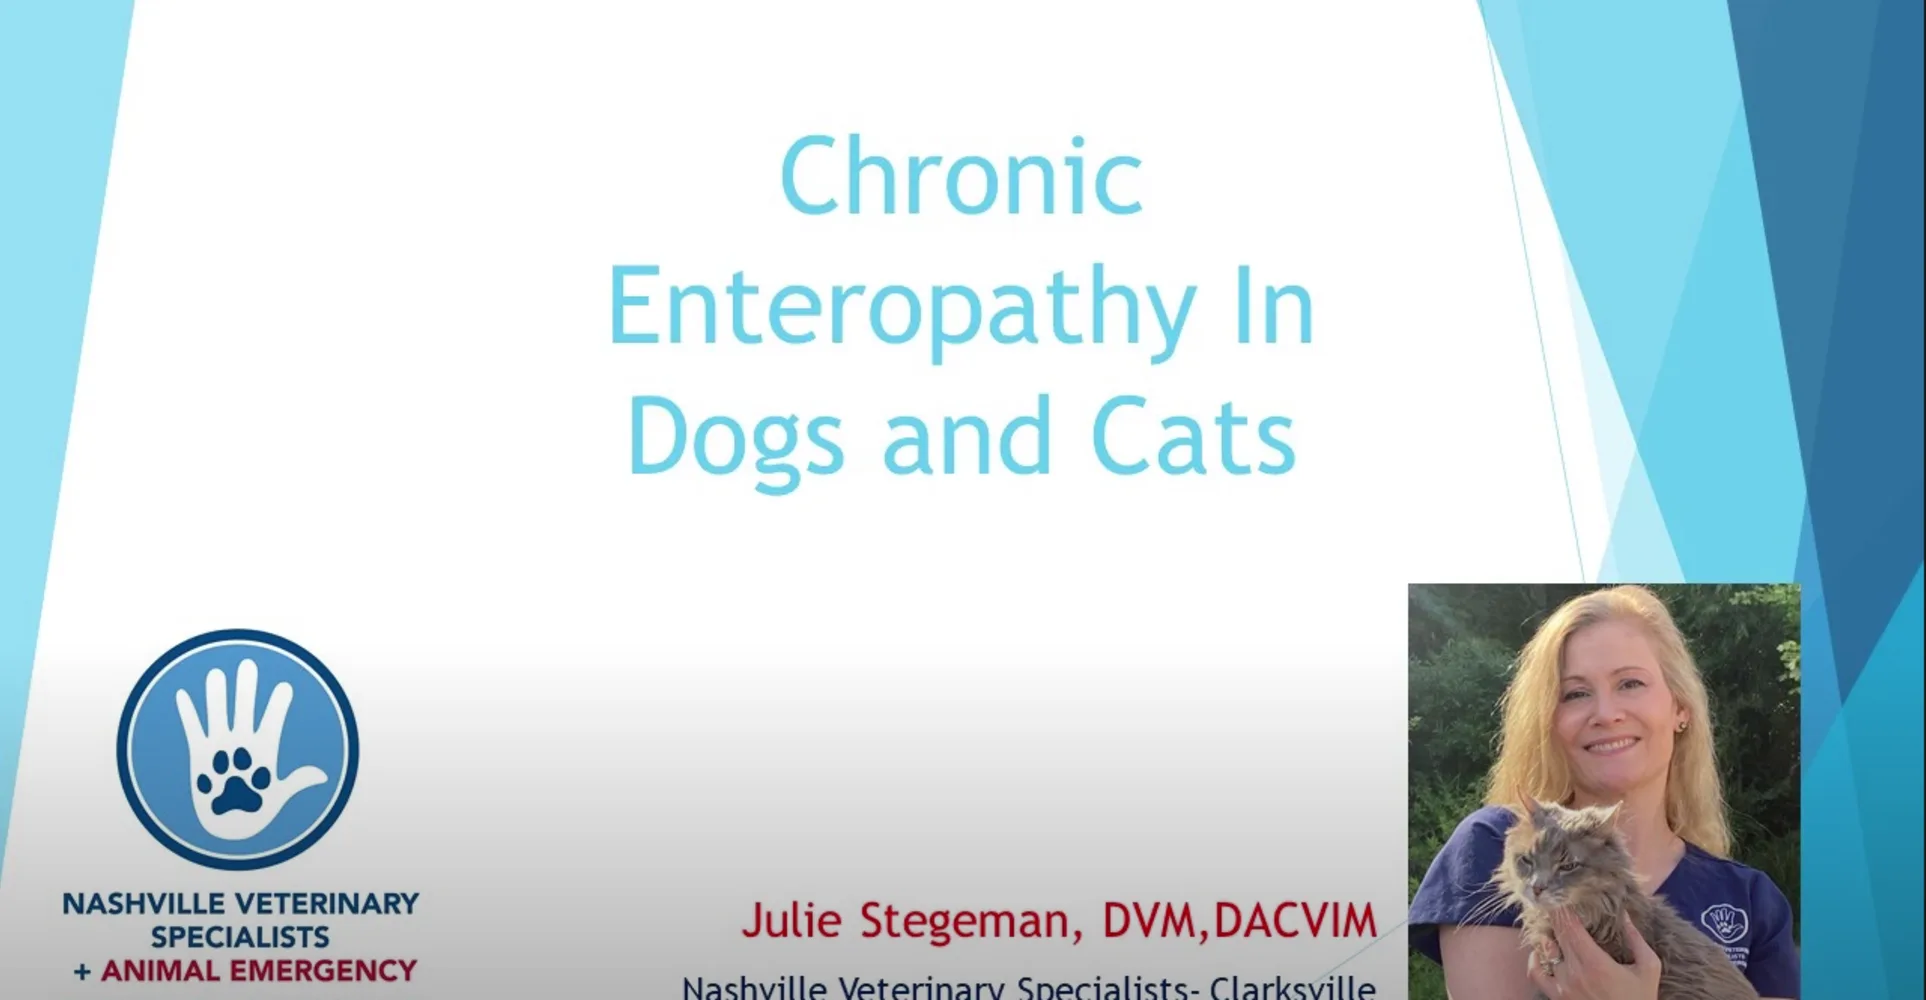 Chronic Enteropathy in Dogs and Cats Video at NVS